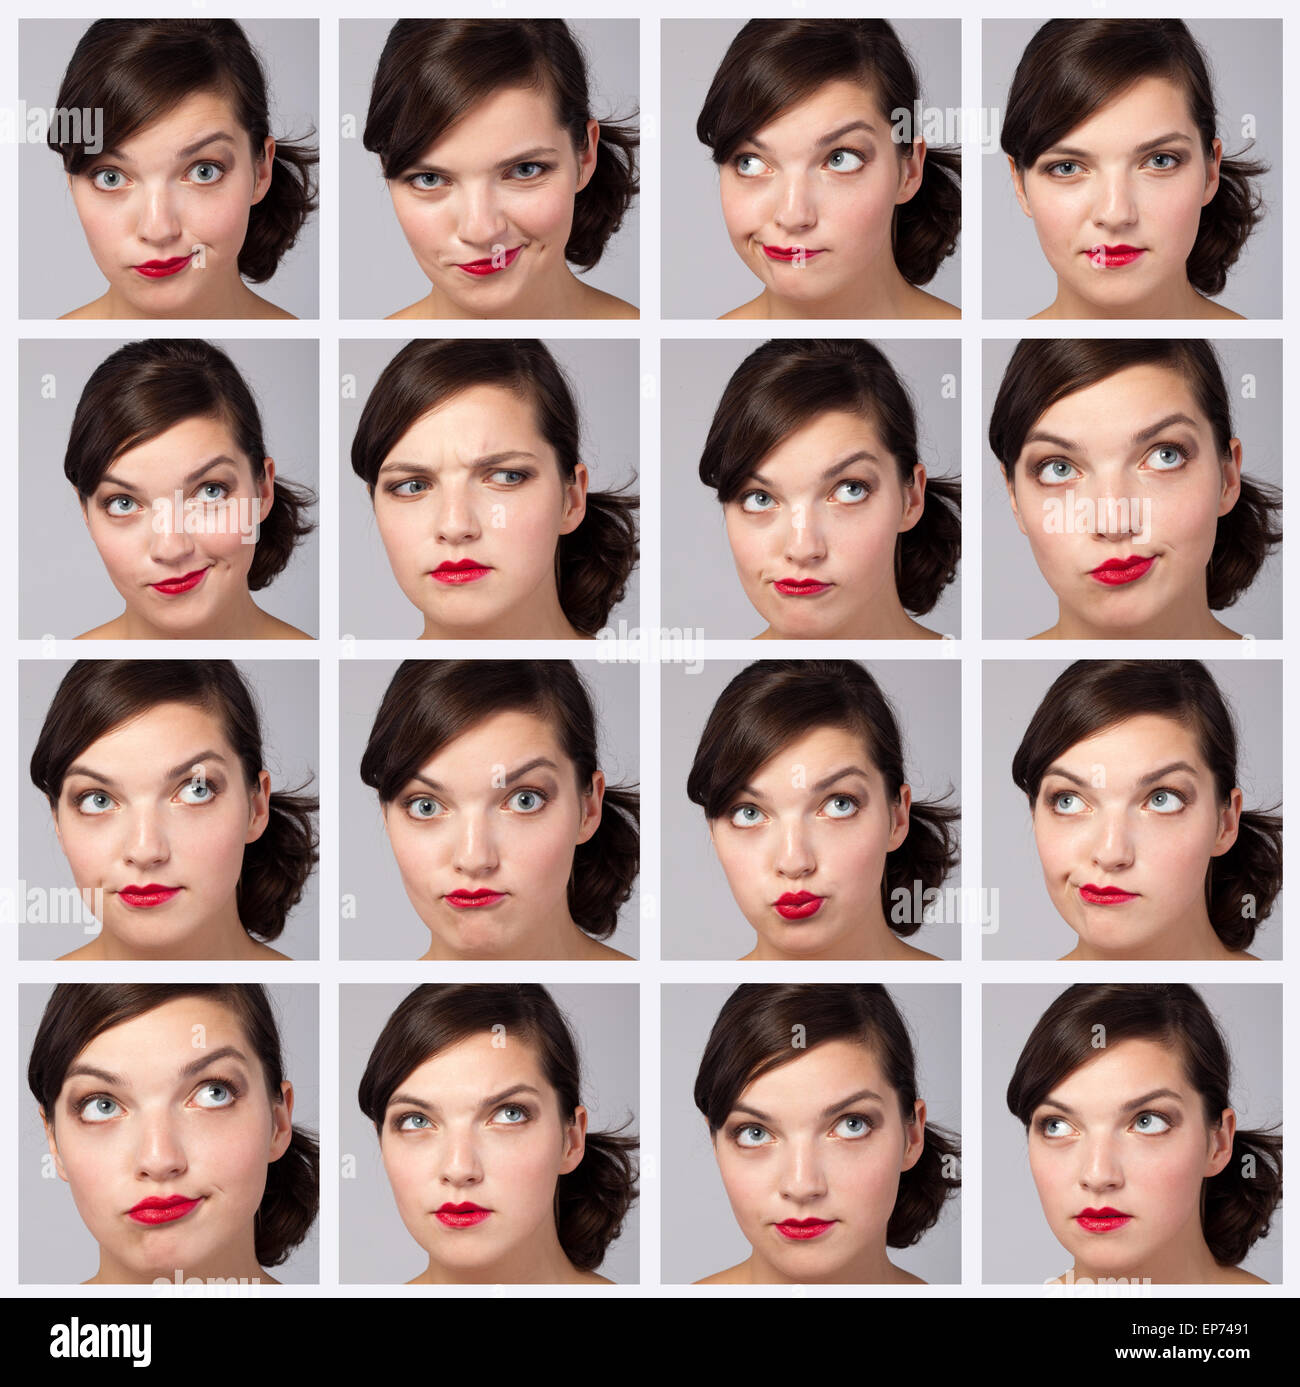 Young Woman Collection of Expressions Stock Photo - Alamy